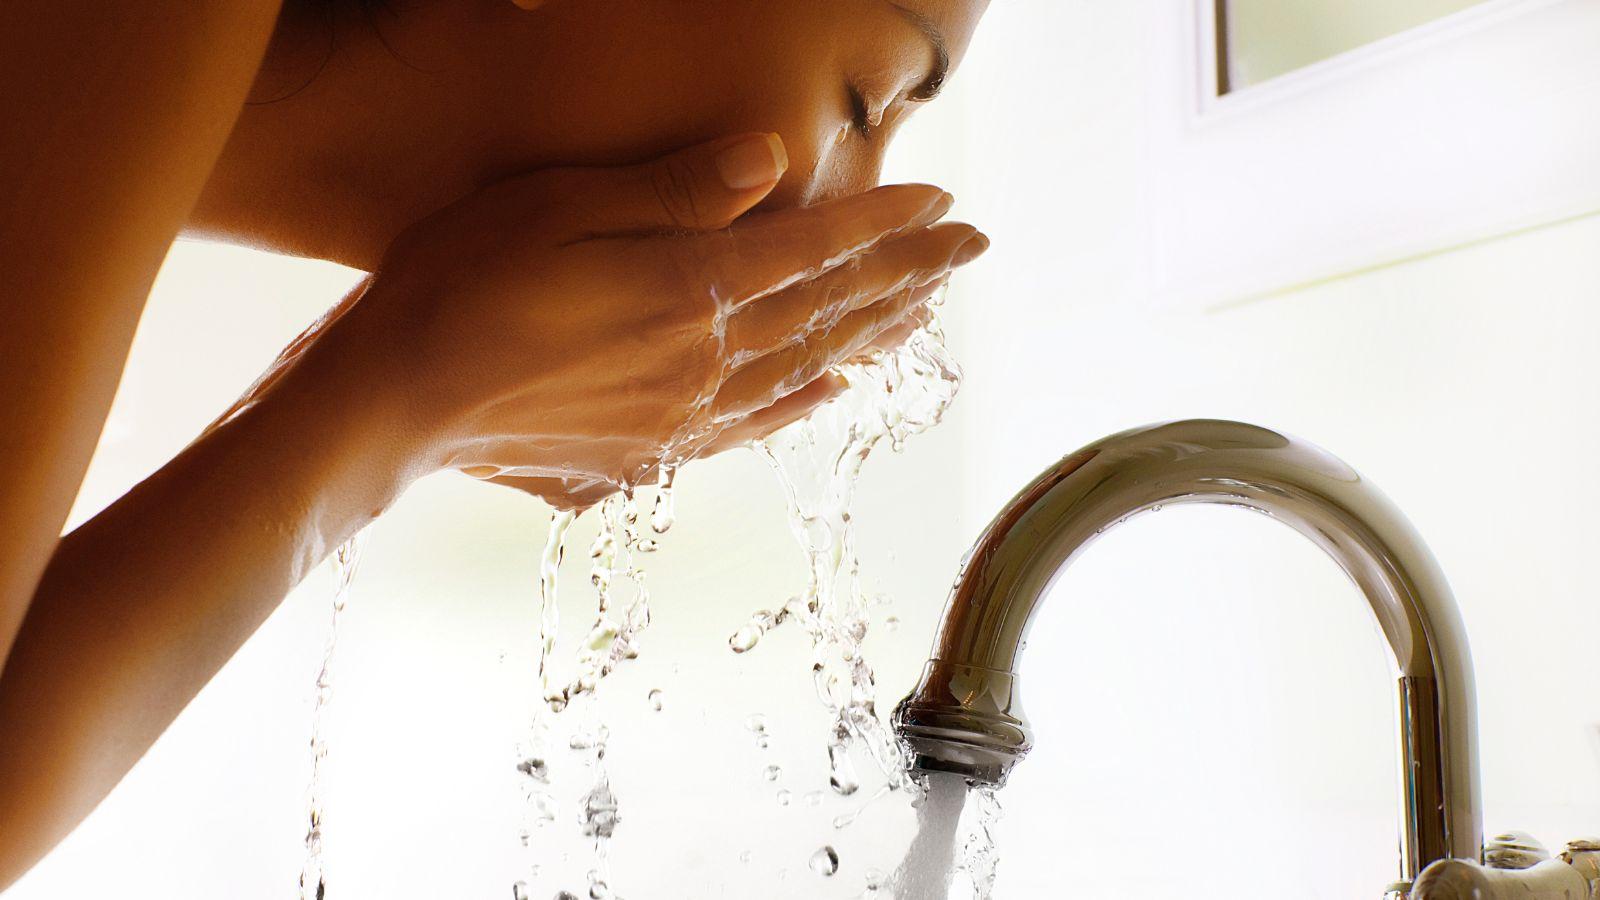 7 great ways to reduce your stress splash face with water